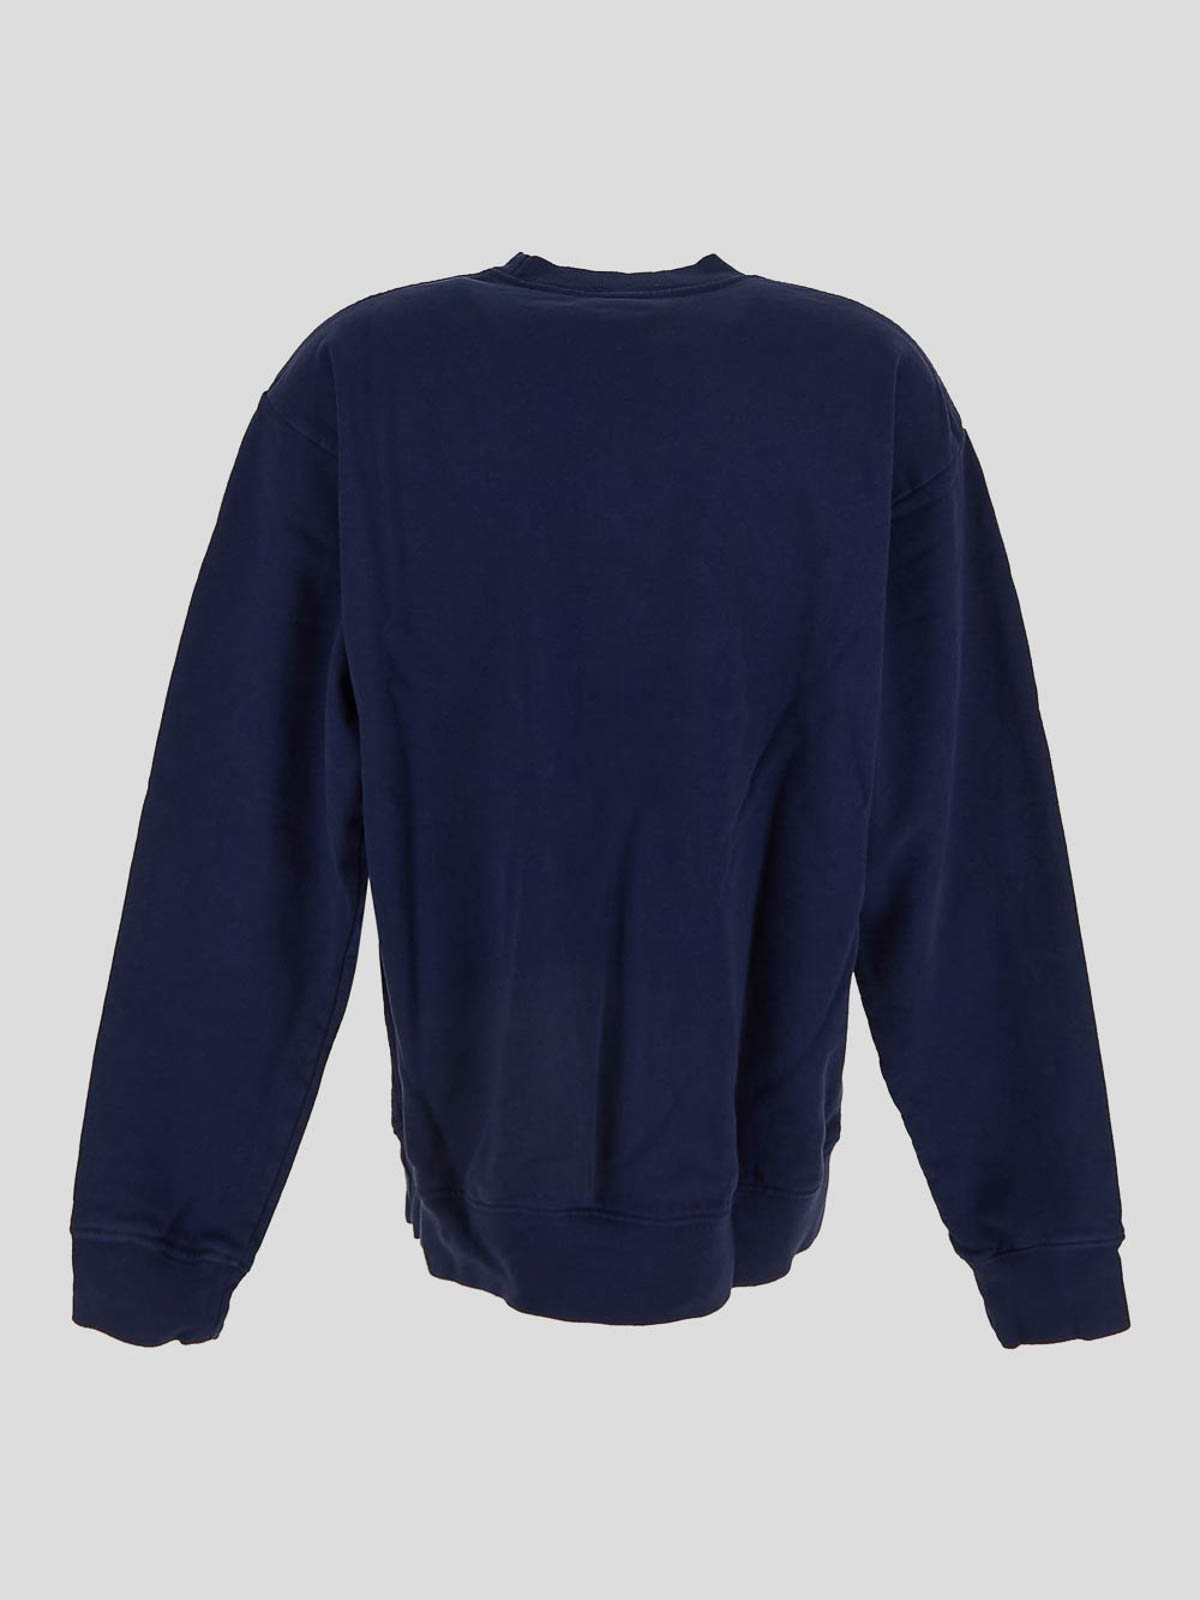 Shop Sporty And Rich Blue Sweatshirt With Long Sleeves